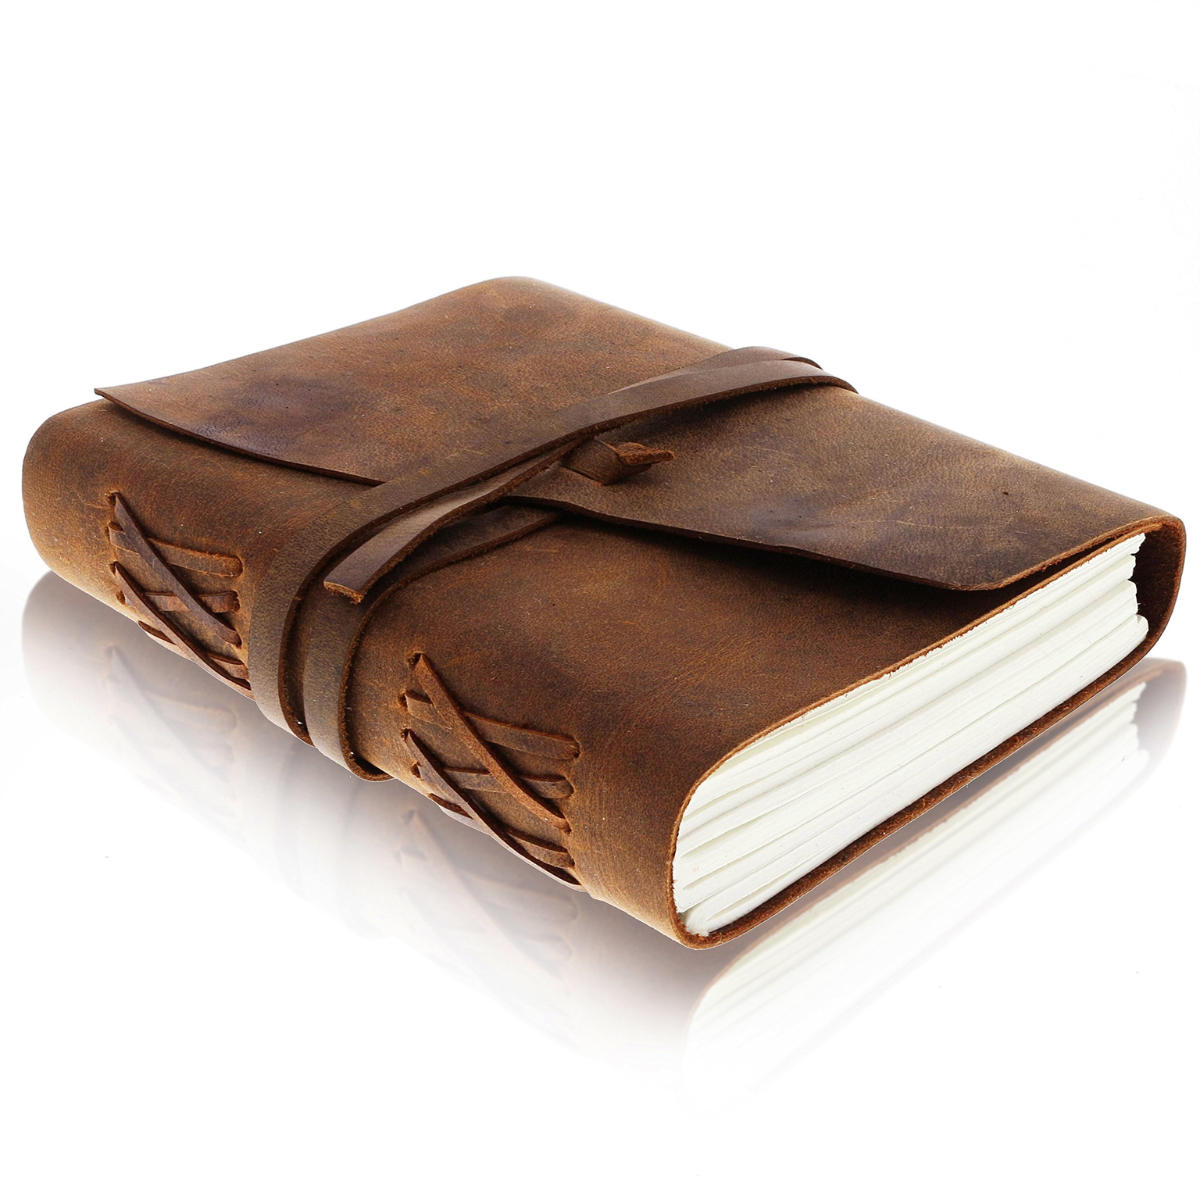 21. Capture His Memories with a Personalized Leather Journal - Perfect Anniversary Gift